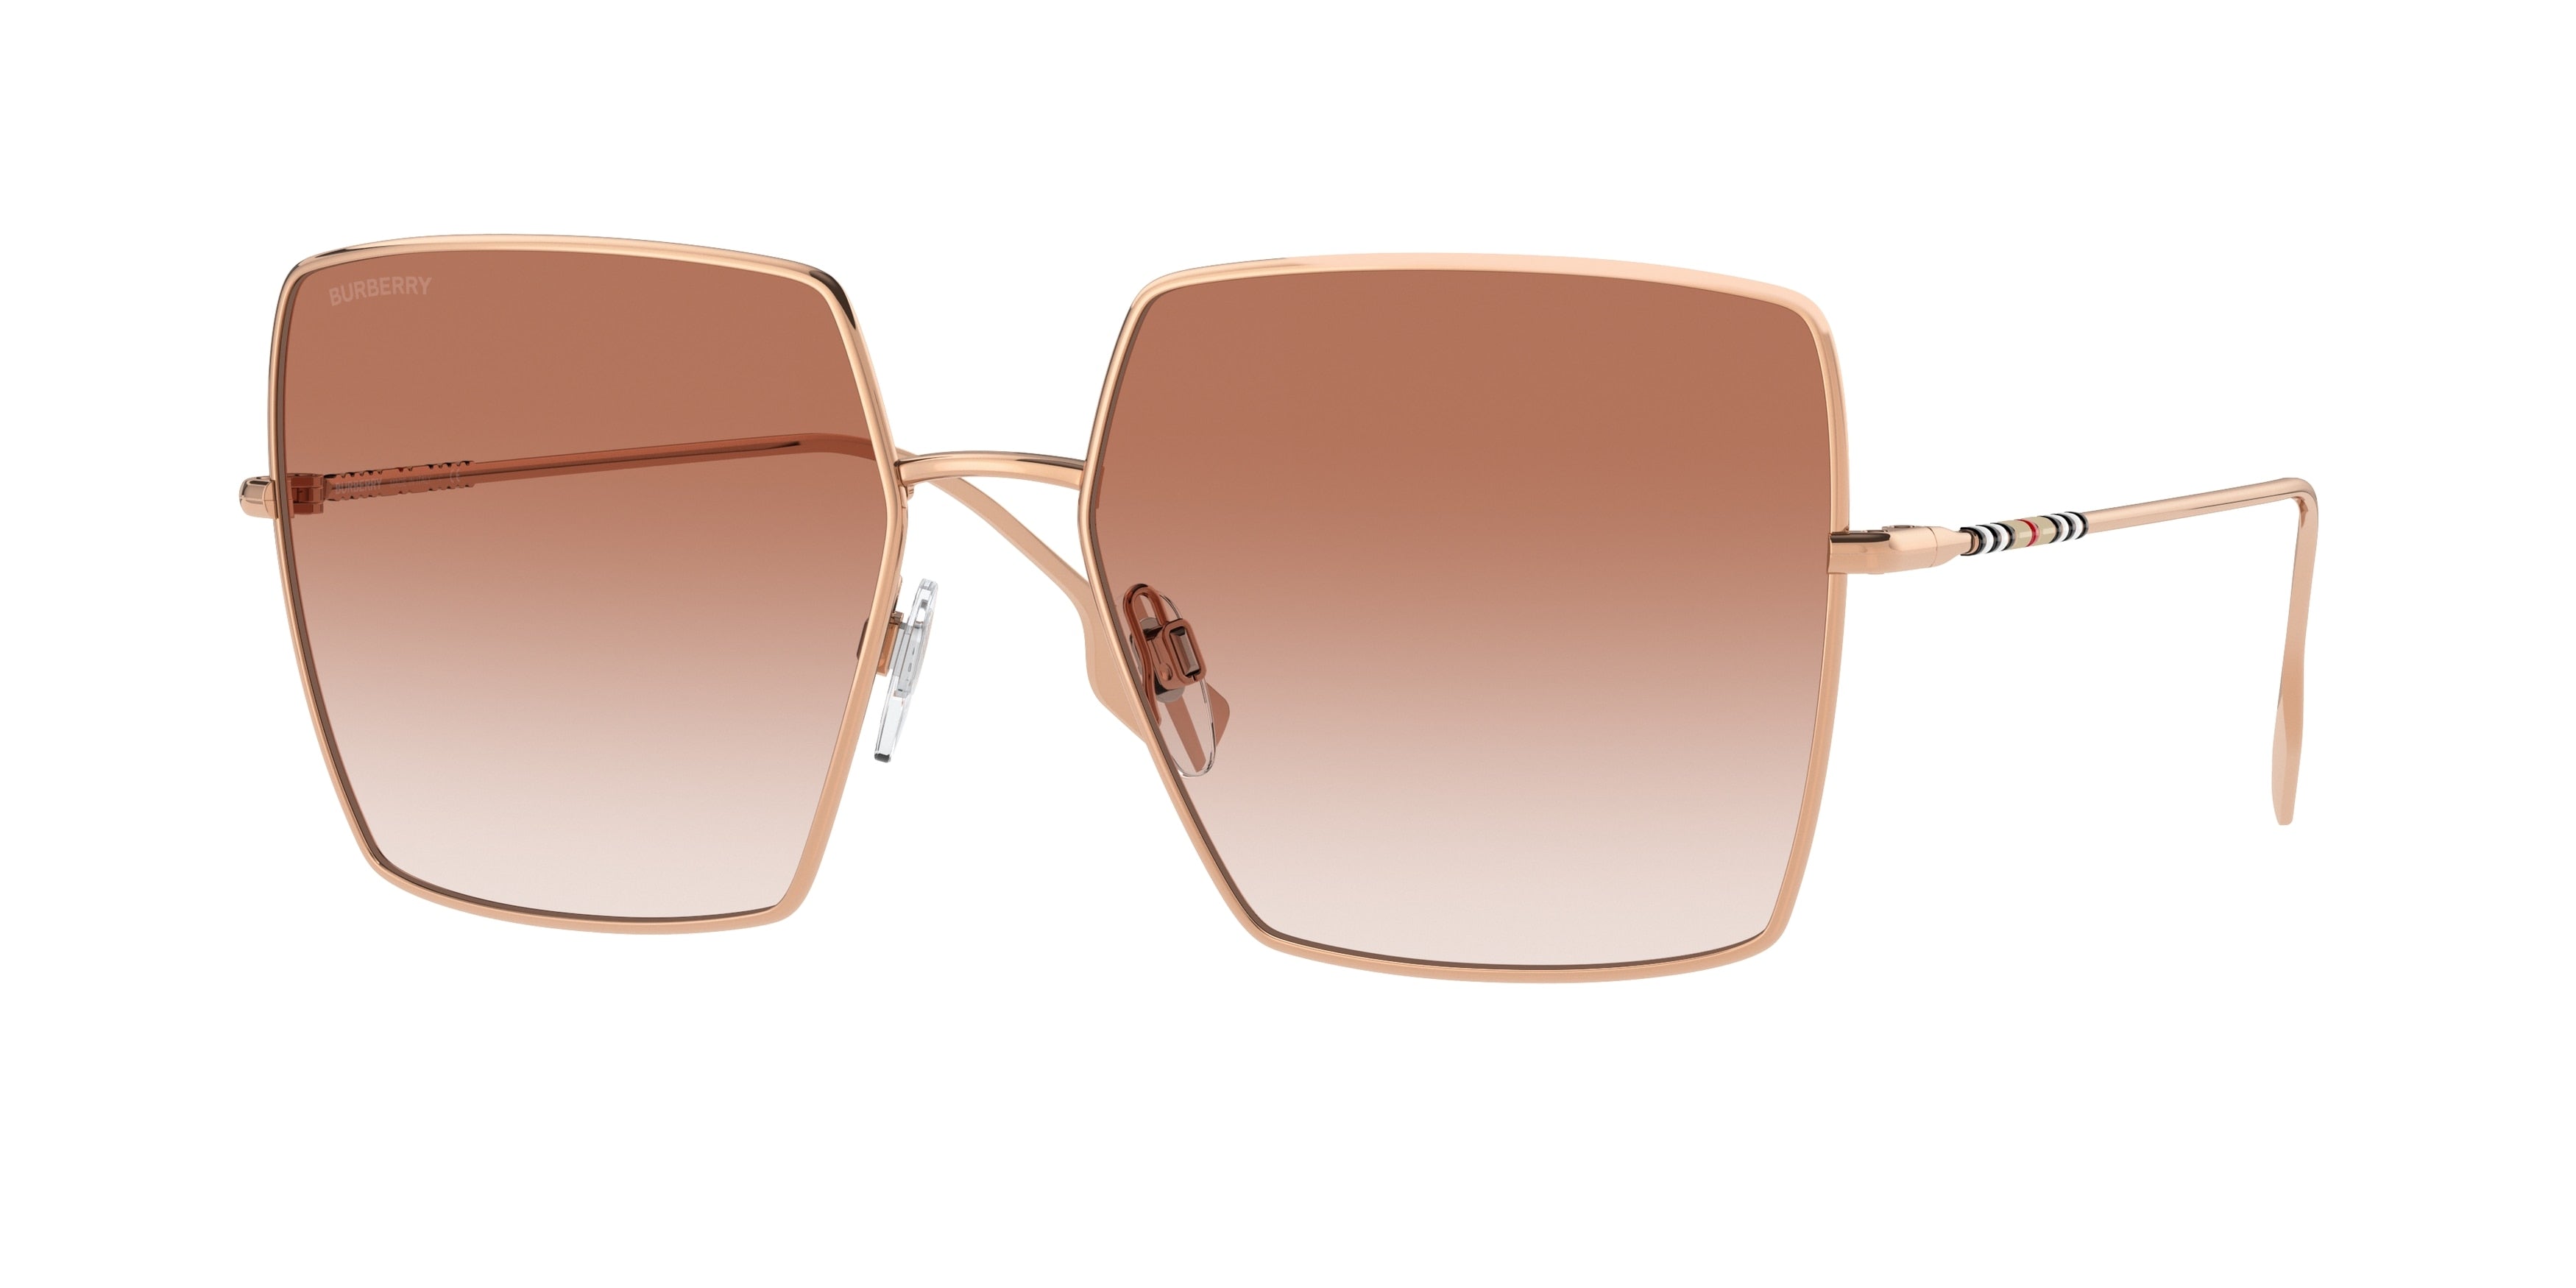 Burberry DAPHNE BE3133 Square Sunglasses  133713-Rose Gold 57-140-16 - Color Map Gold